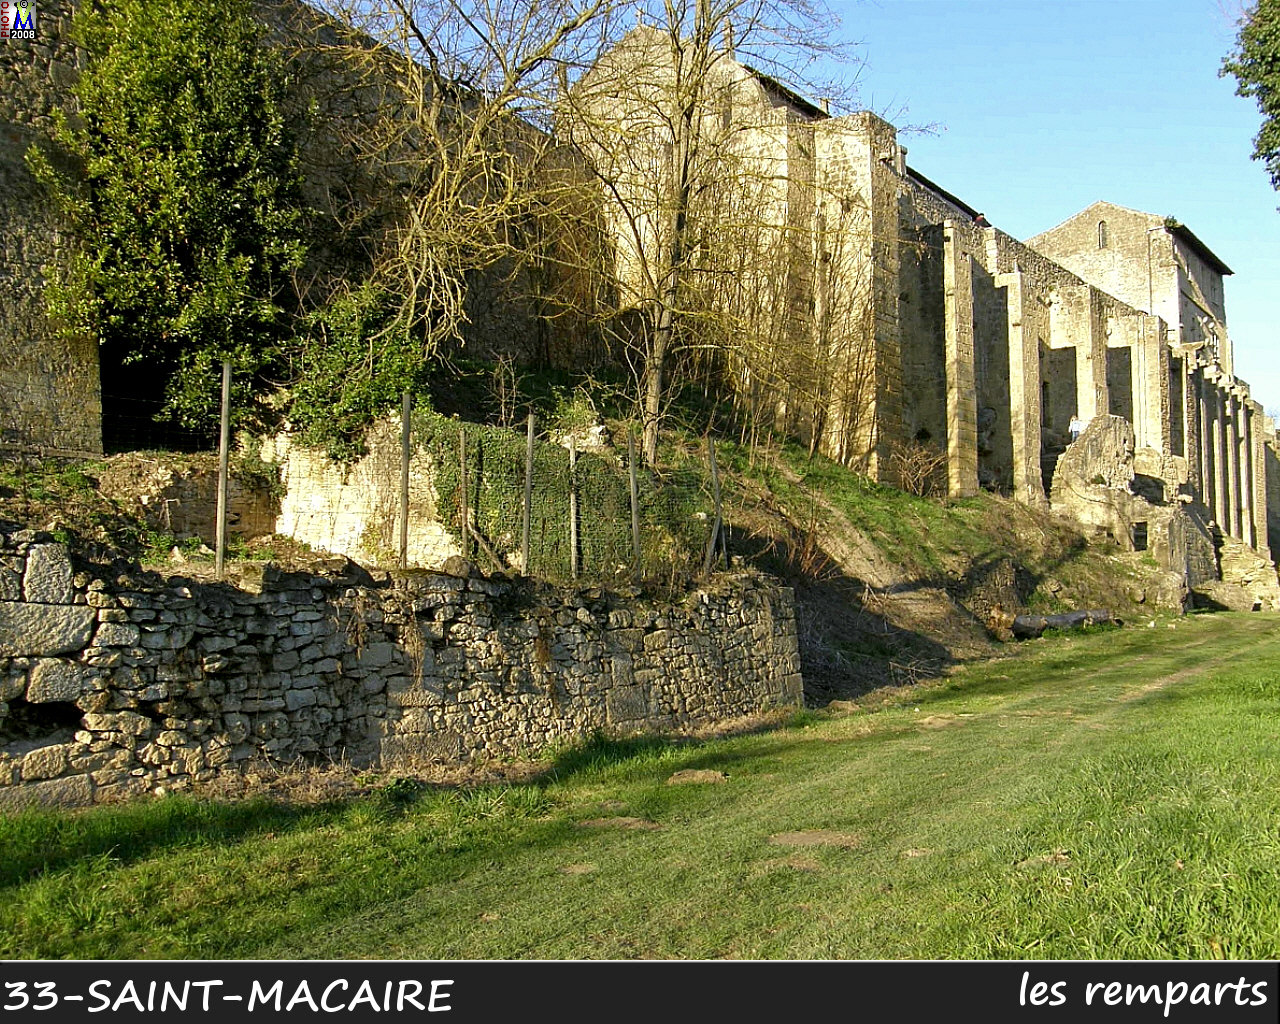 33StMACAIRE_remparts_106.jpg